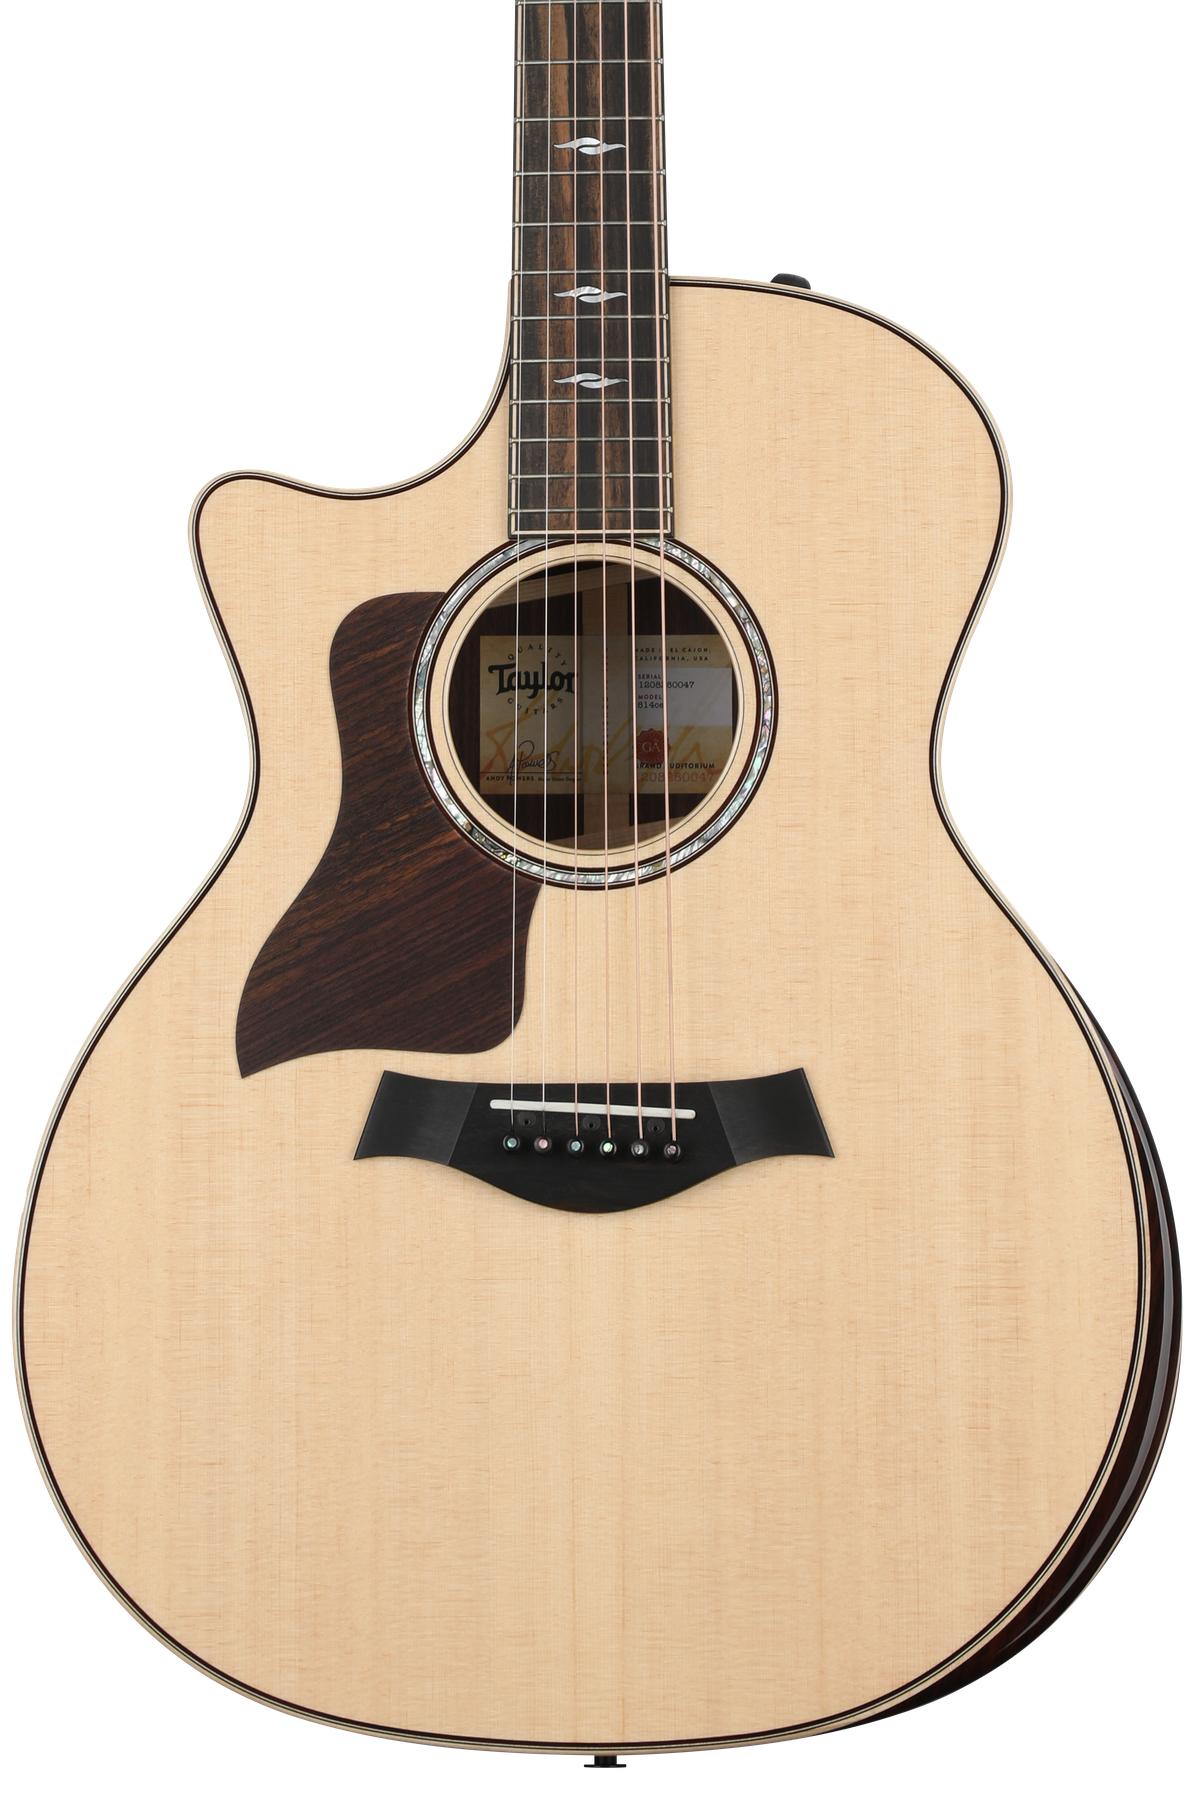 Taylor 814ce Left-handed Acoustic-electric Guitar - Natural with V-Class Bracing and Radiused Armrest